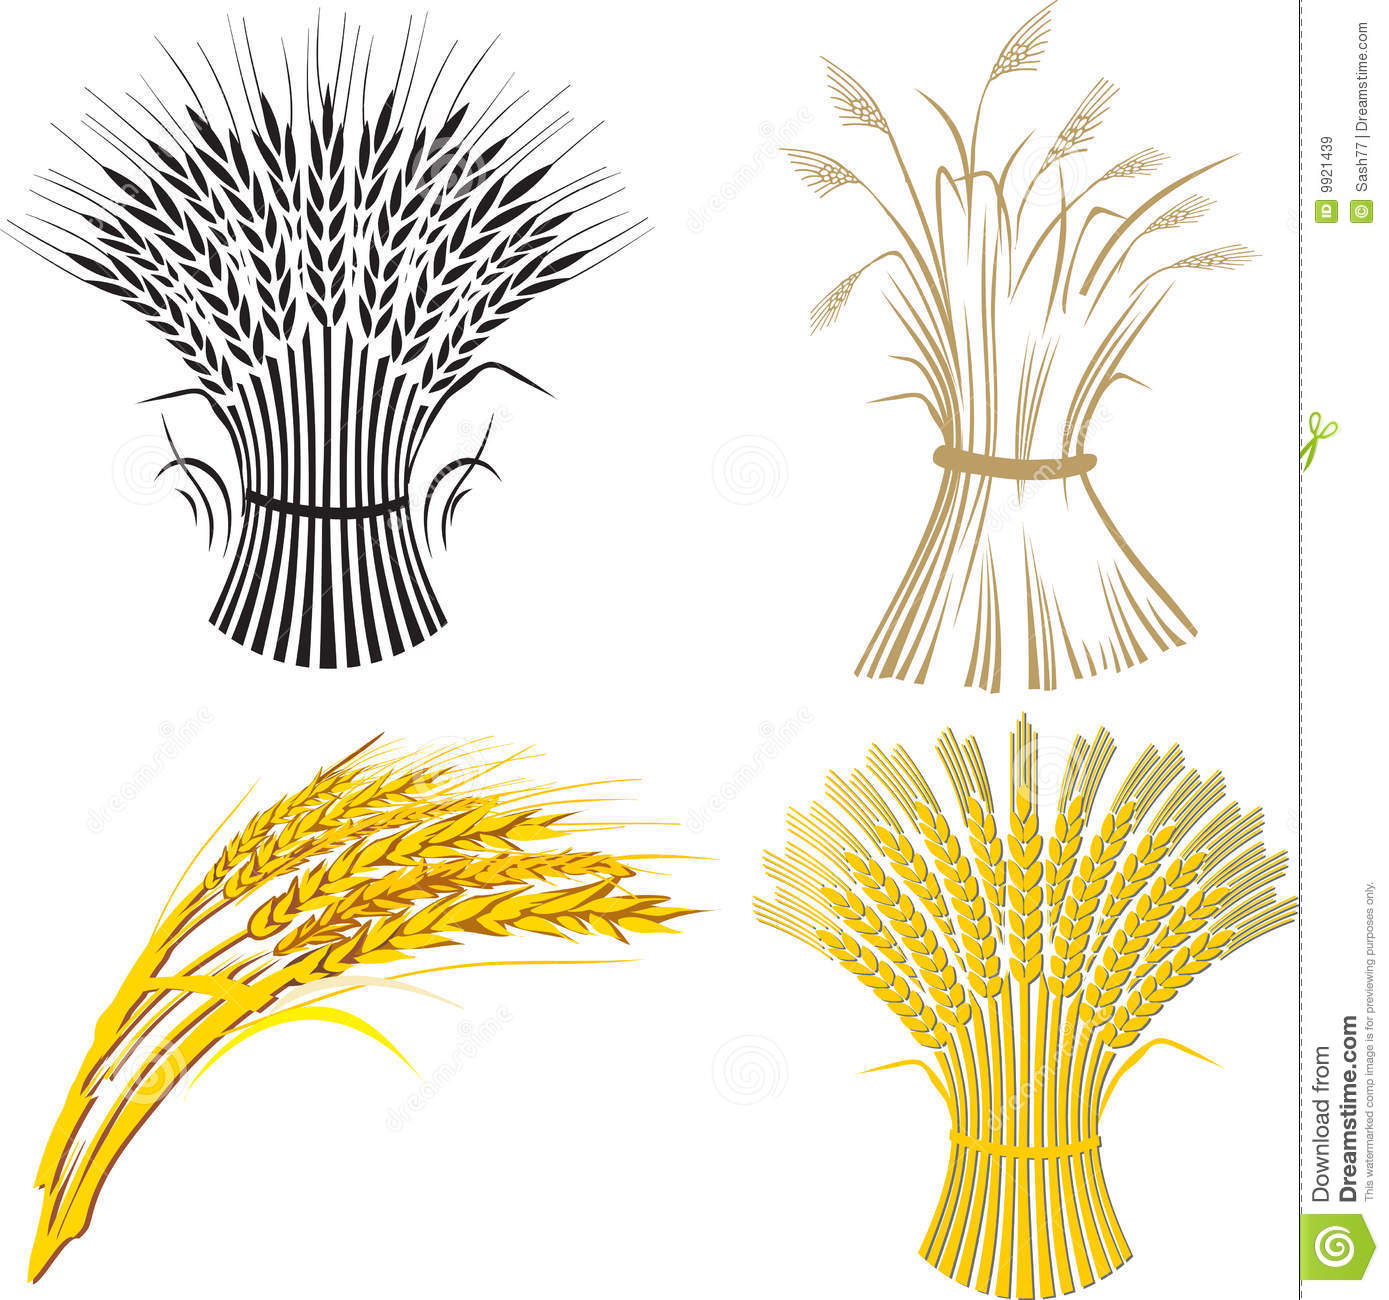 Illustration Of Four Wheat Sheafs